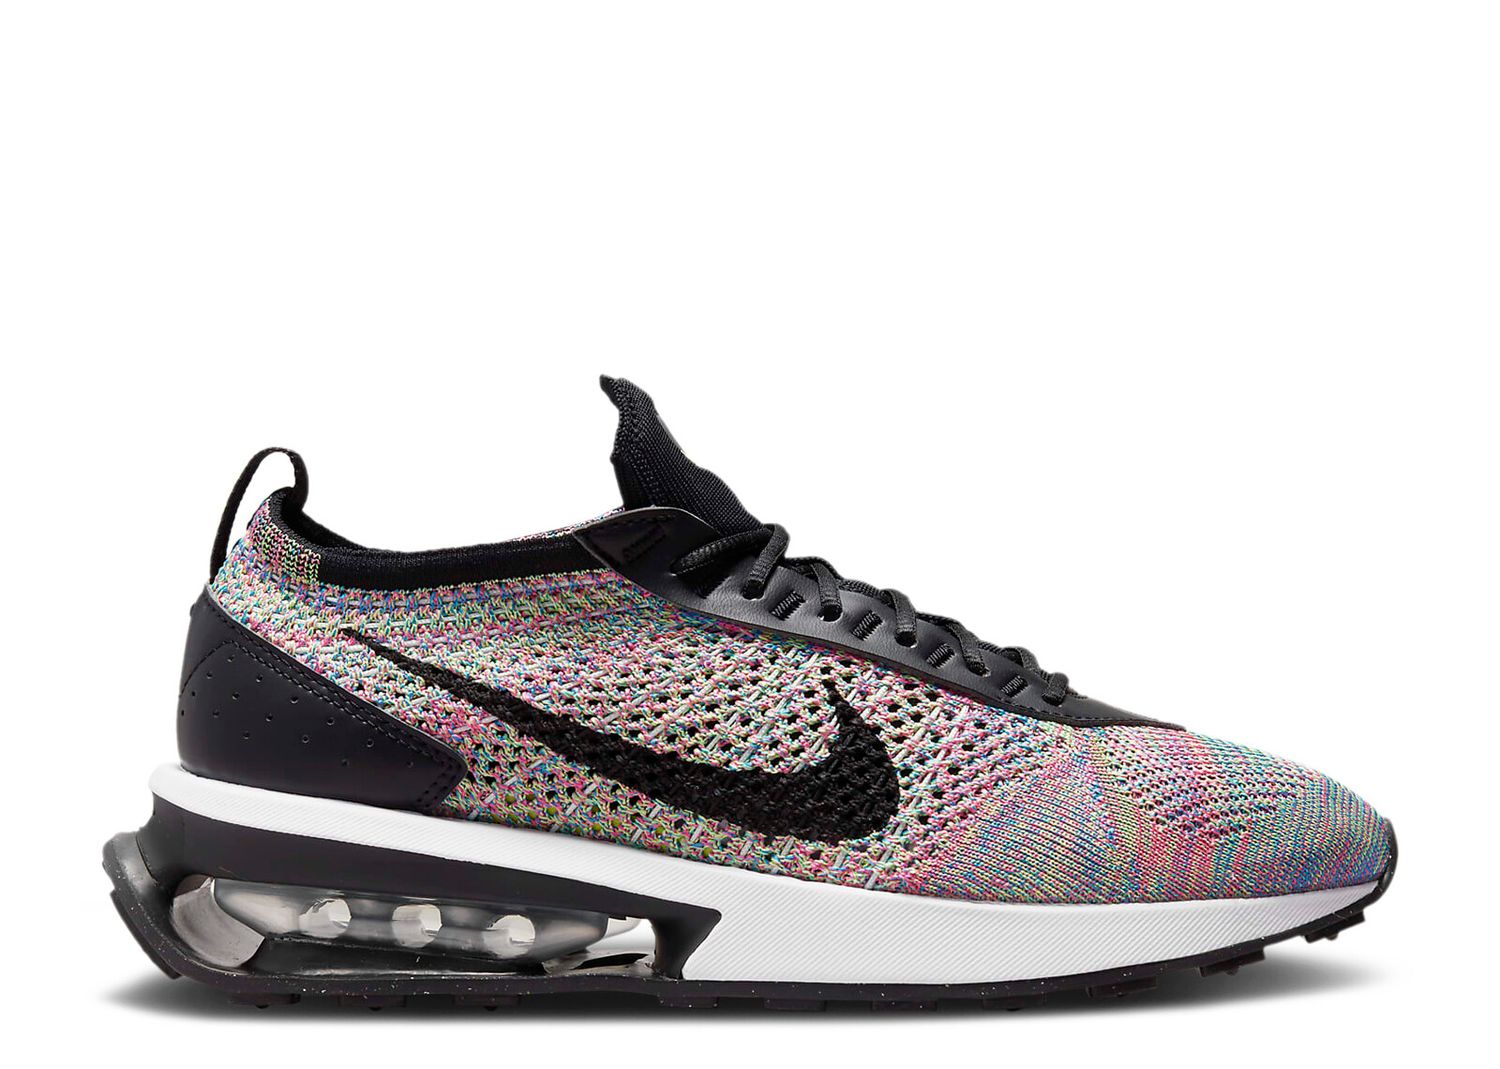 Wmns Air Max Flyknit Racer 'Multi Color' - Nike - DM9073 300 - ghost ...